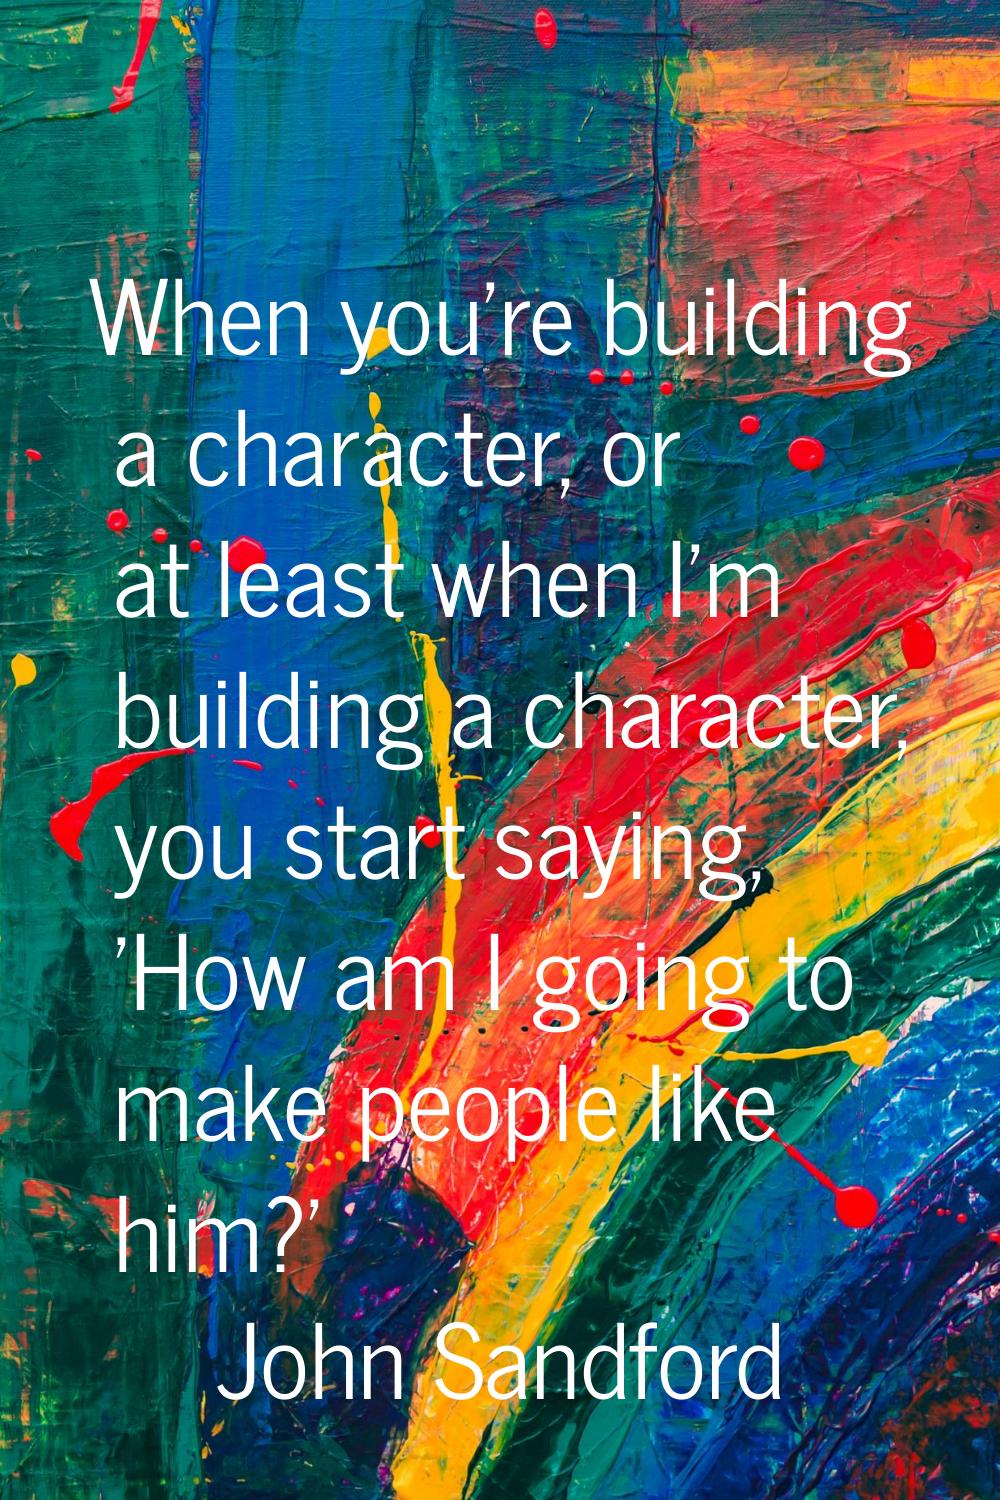 When you're building a character, or at least when I'm building a character, you start saying, 'How